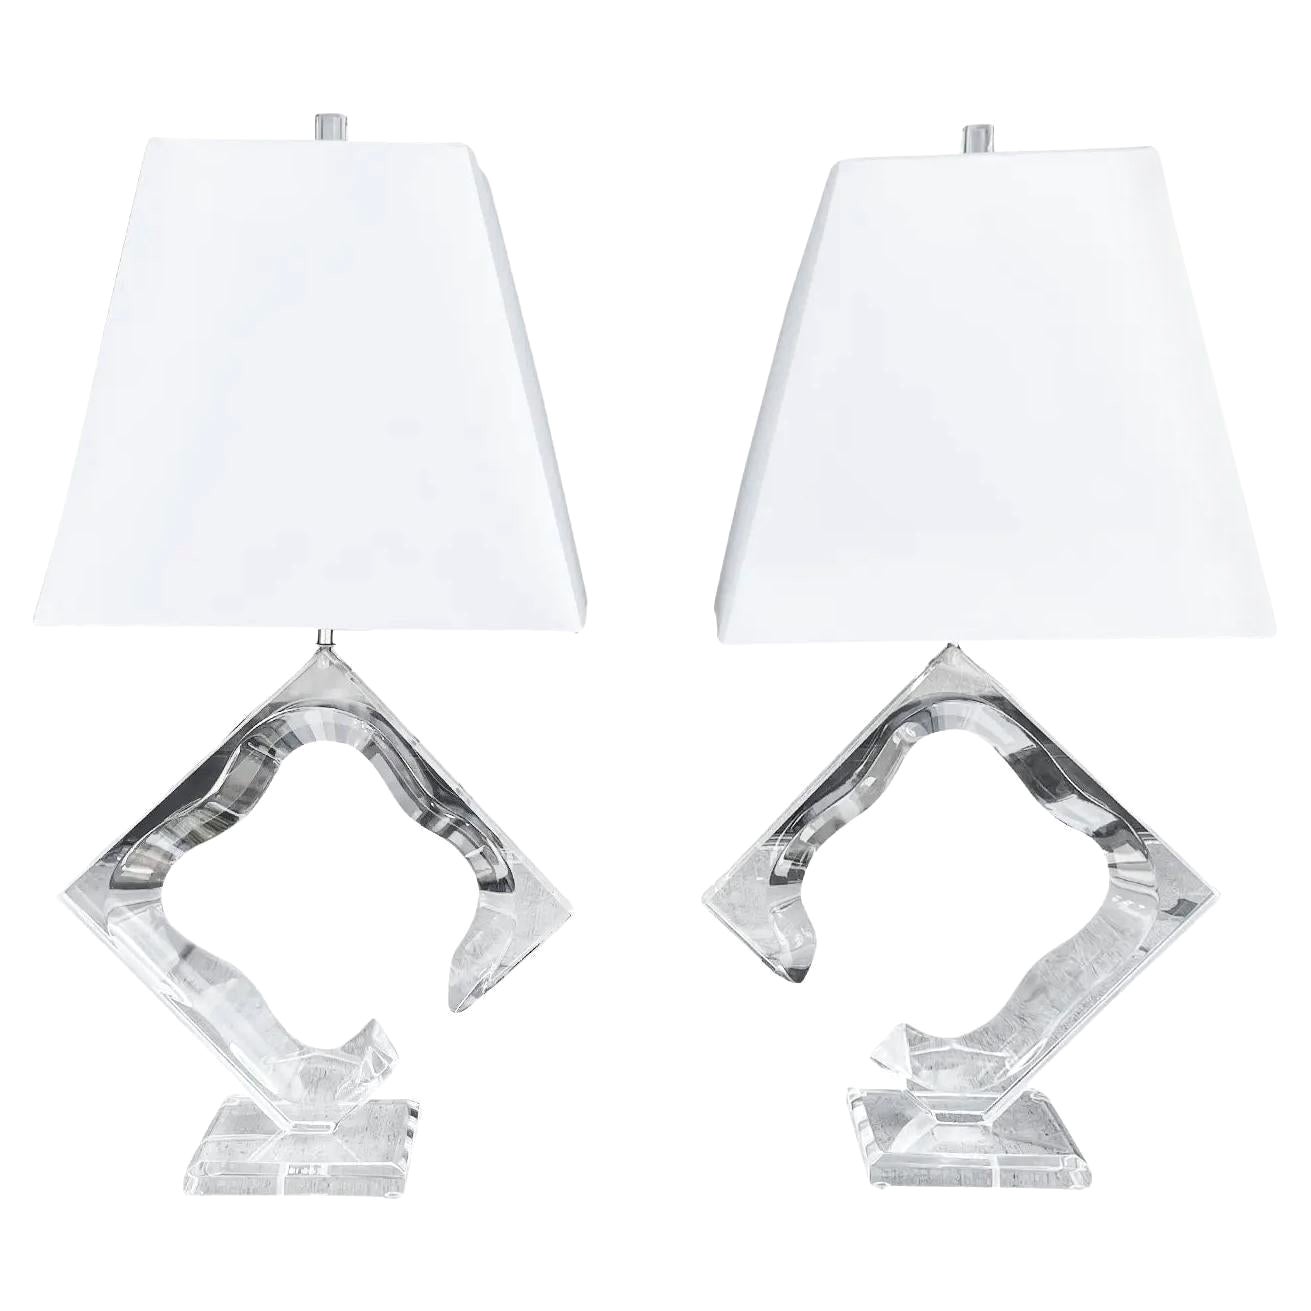 20th Century American Pair of Acrylic Table Lamps, Desk Lights by Hivo Van Teal